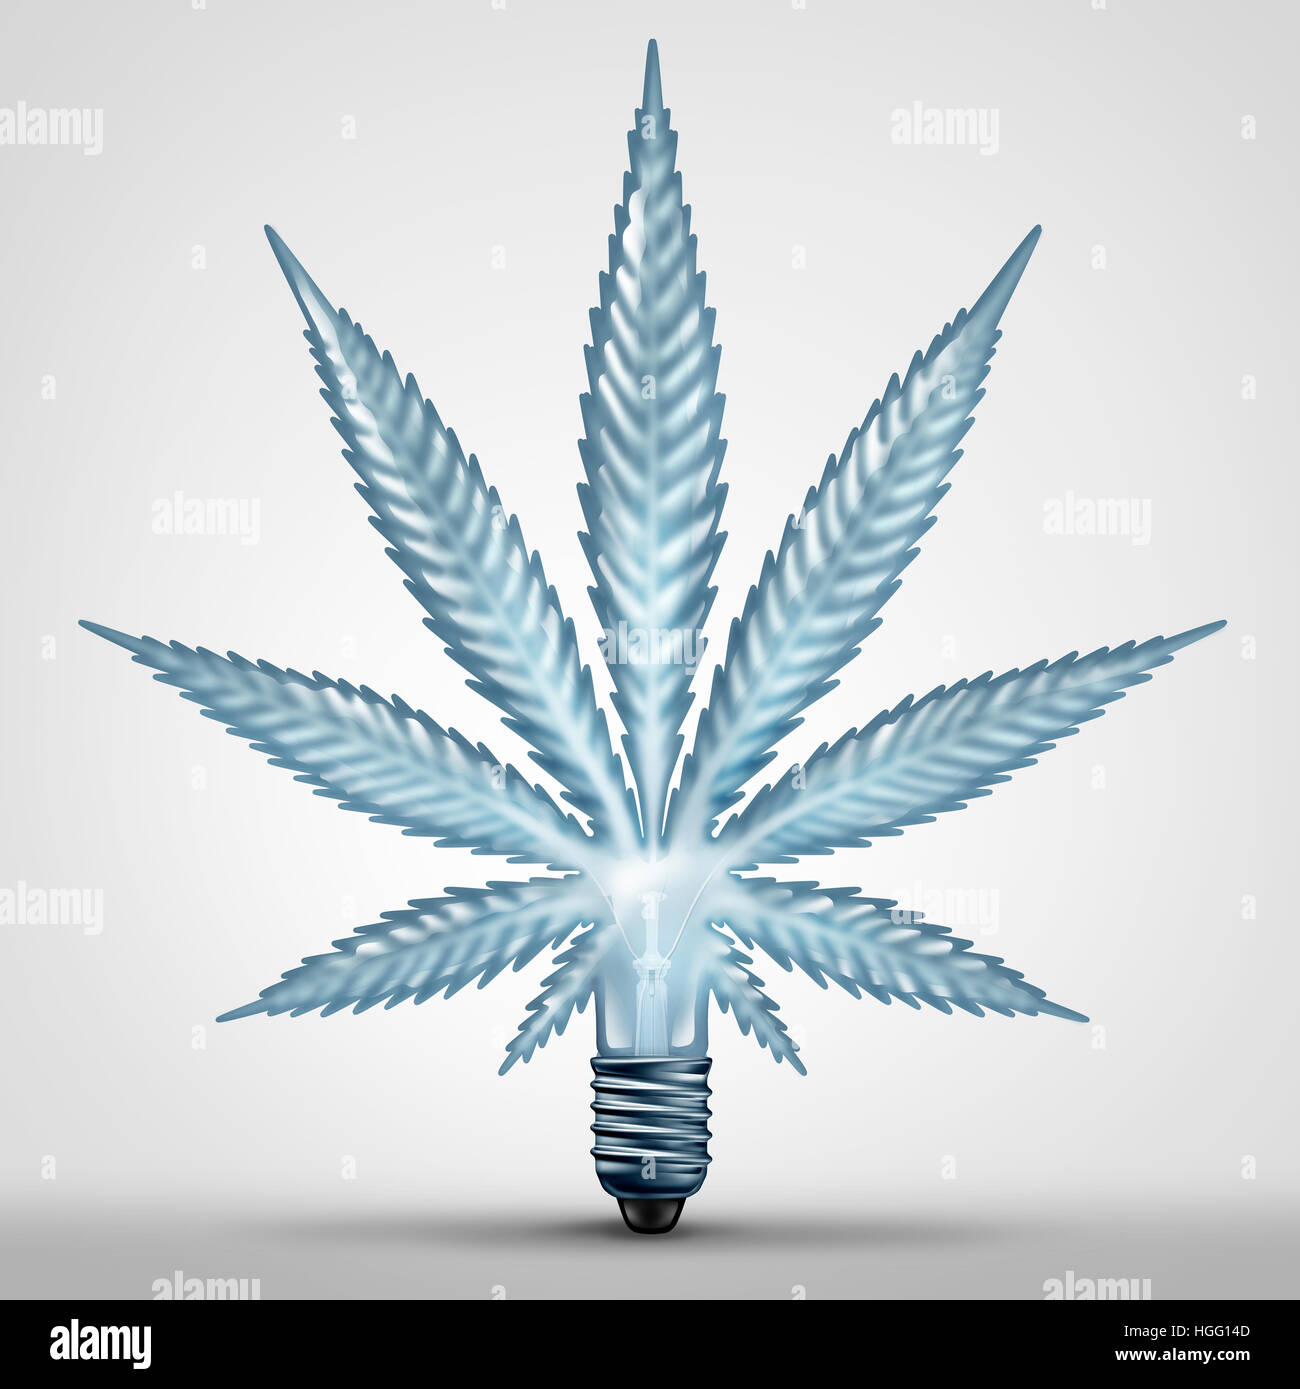 Marijuana idea concept and medical cannabis solution symbol as a light bulb shaped as an illuminated weed leaf as a recreational drug legalization and Stock Photo